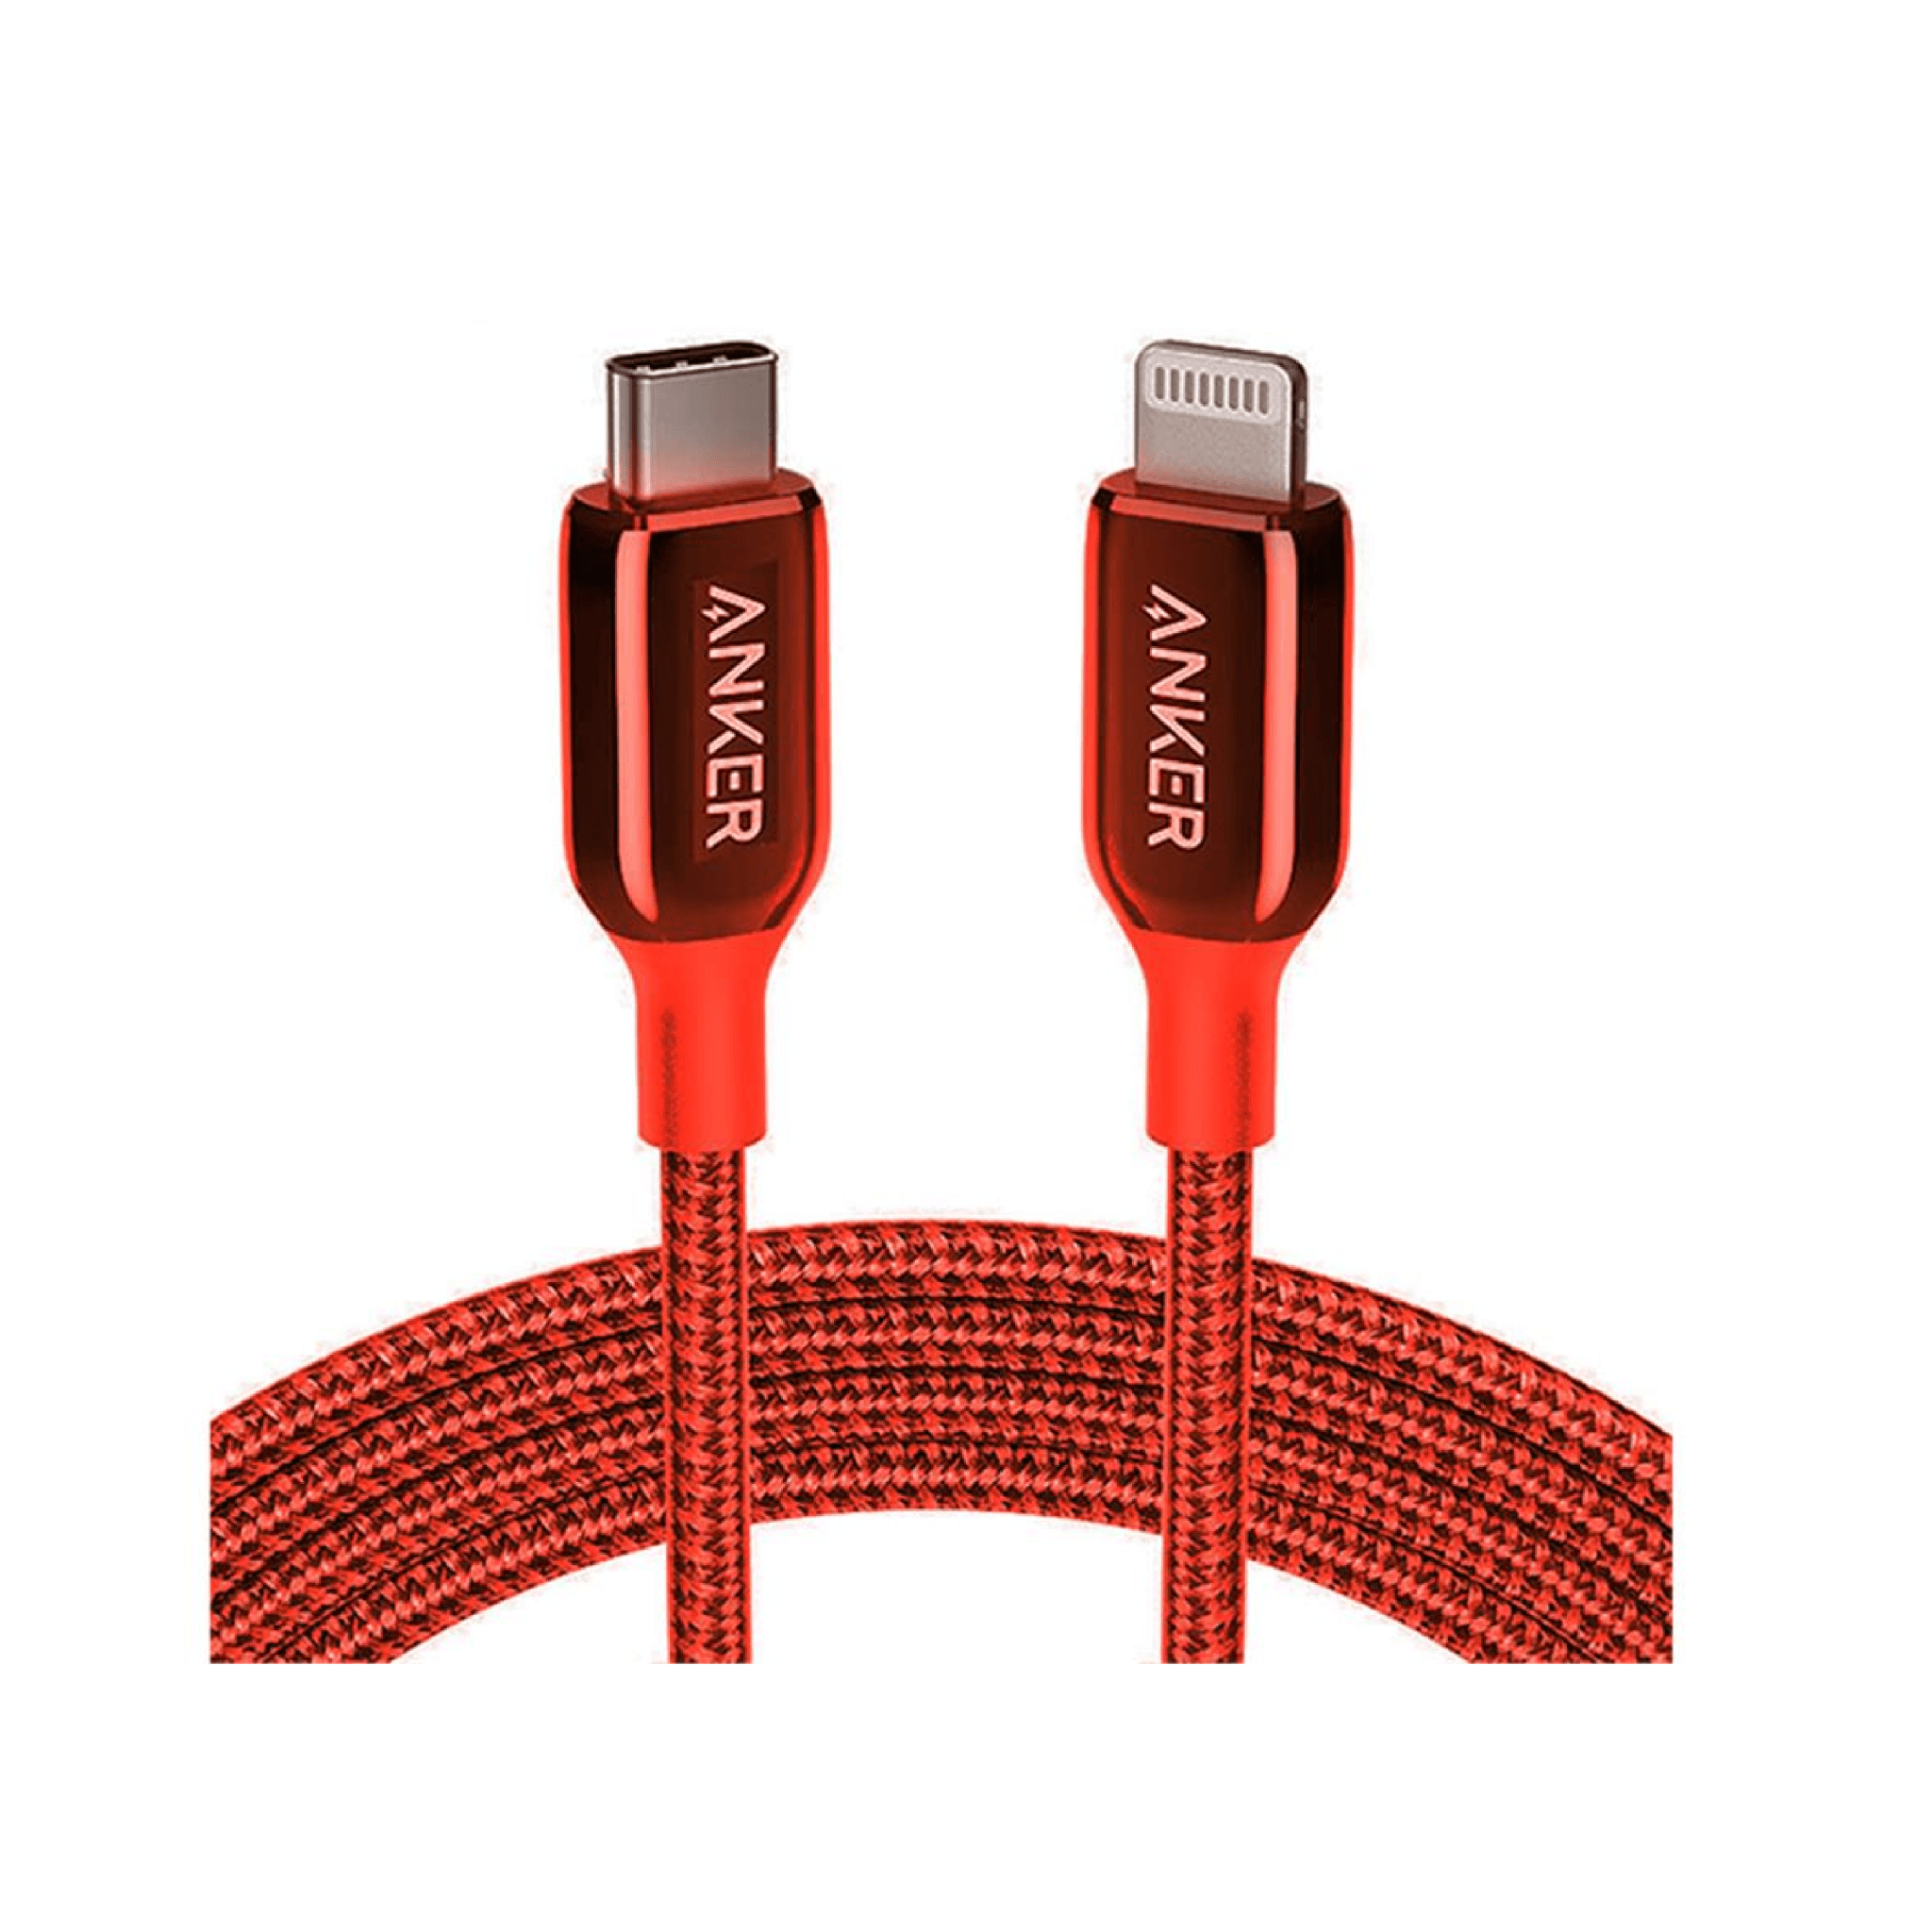 Anker PowerLine+ III USB-C cable with Lightning connector 6ft - Red - Store 974 | ستور ٩٧٤